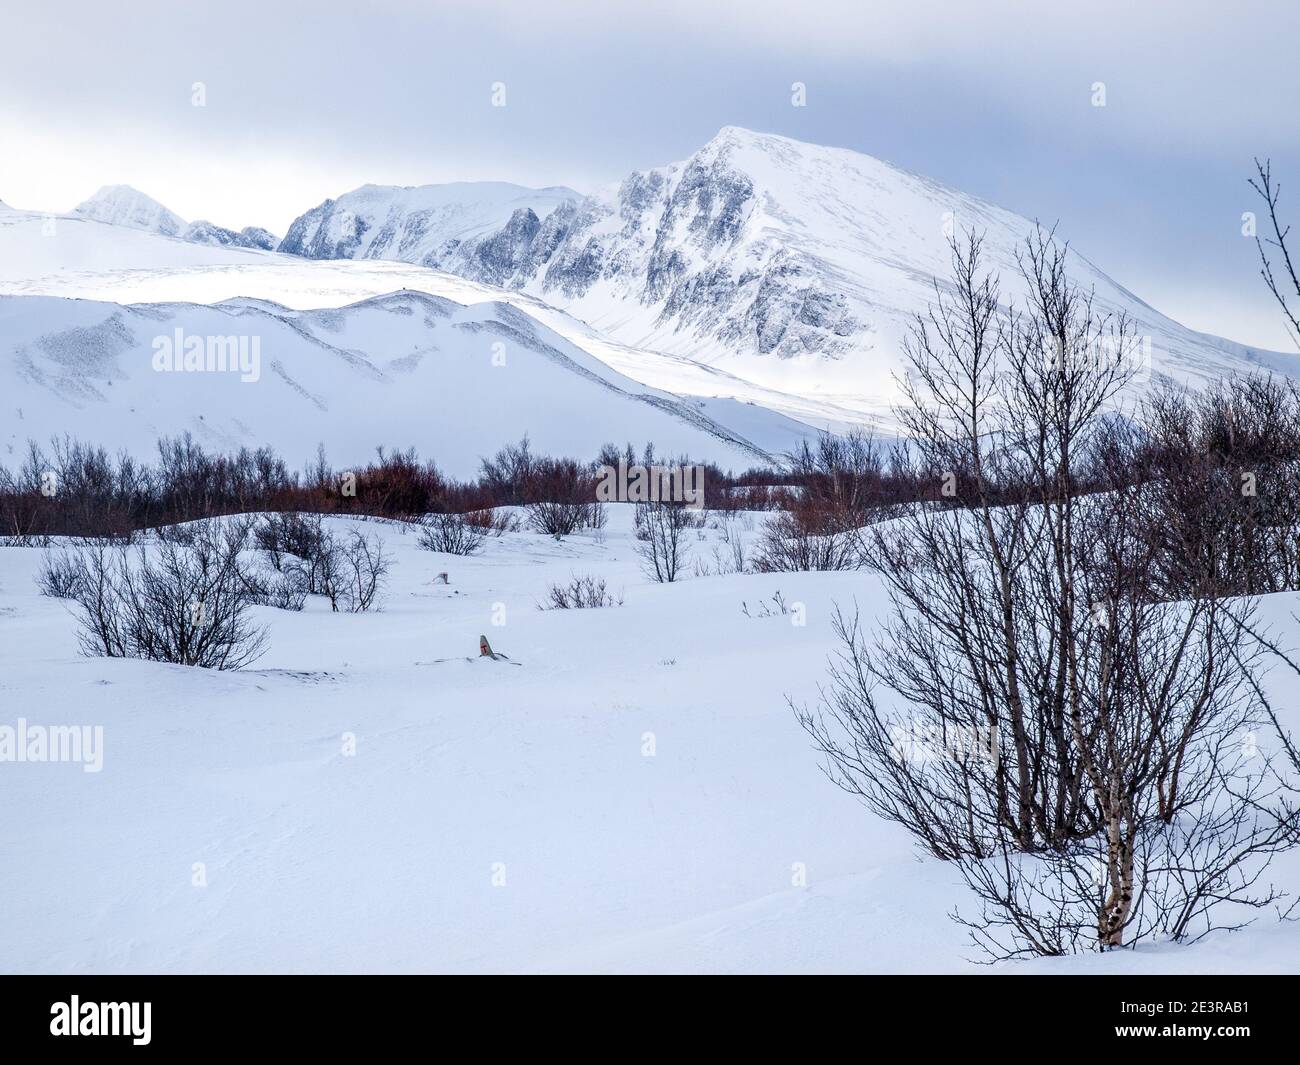 The Rondane National Park, Norway in winter Stock Photo